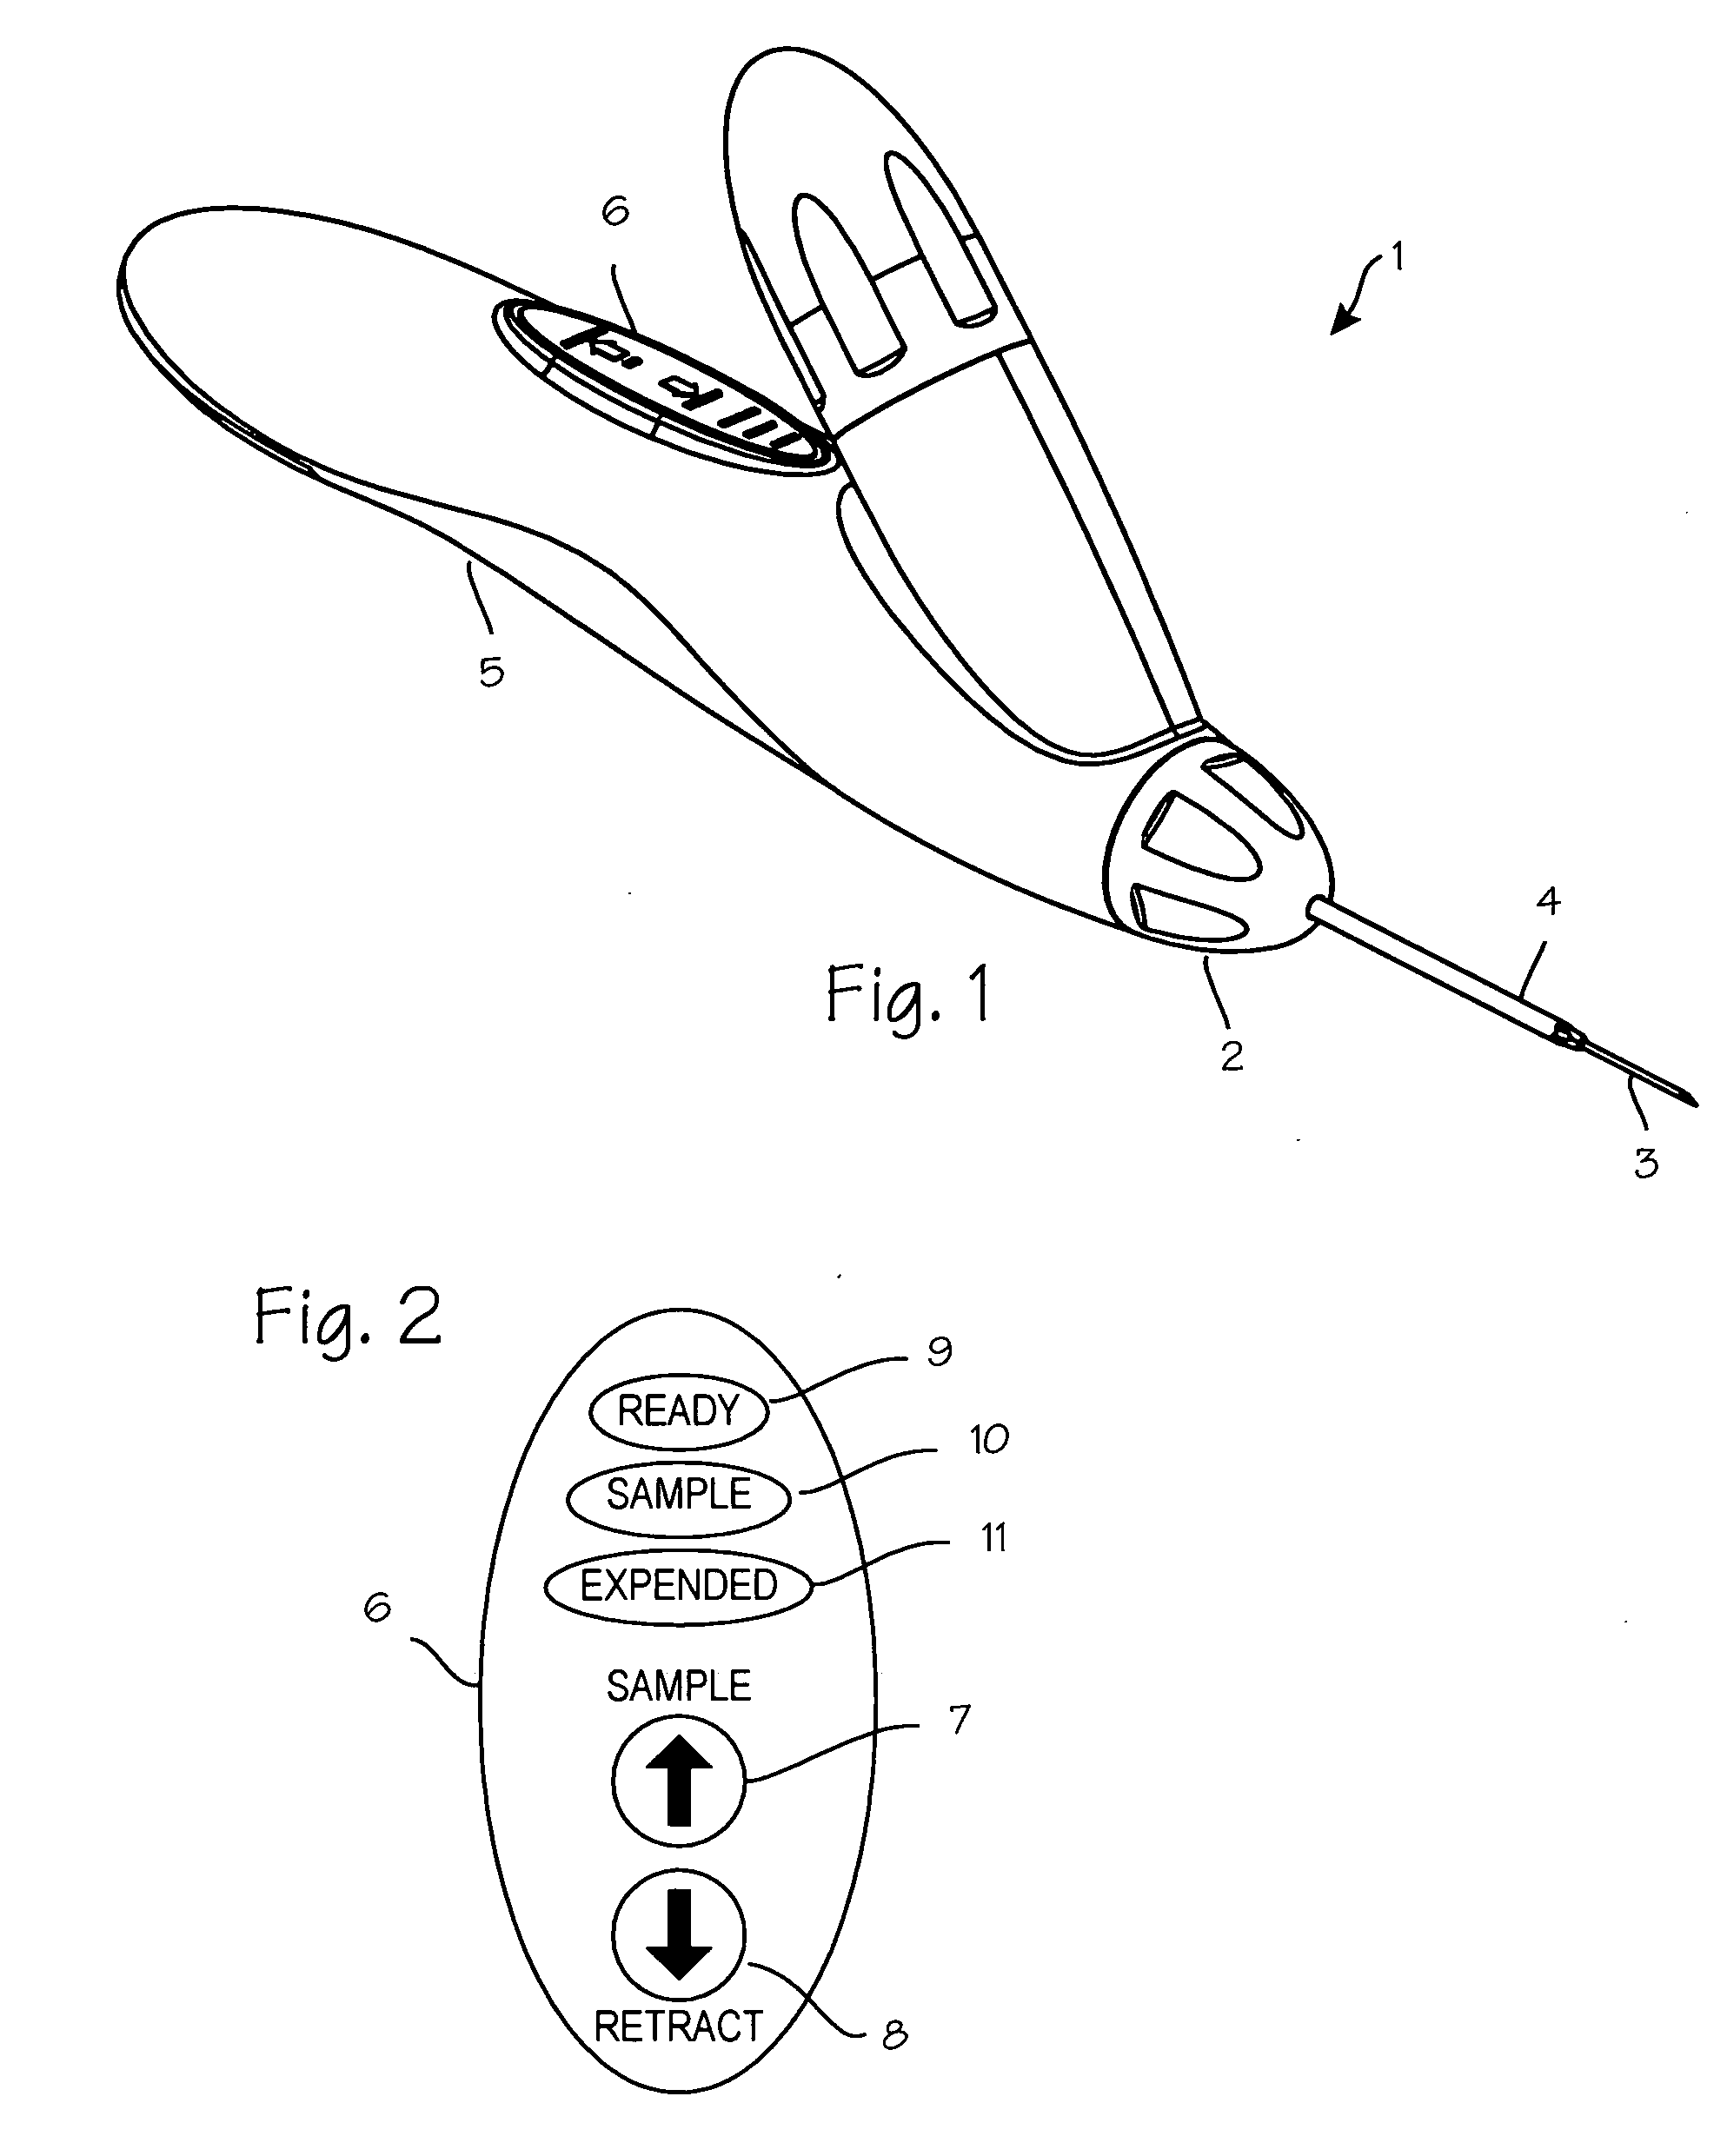 Rotational core biopsy device with liquid cryogen adhesion probe